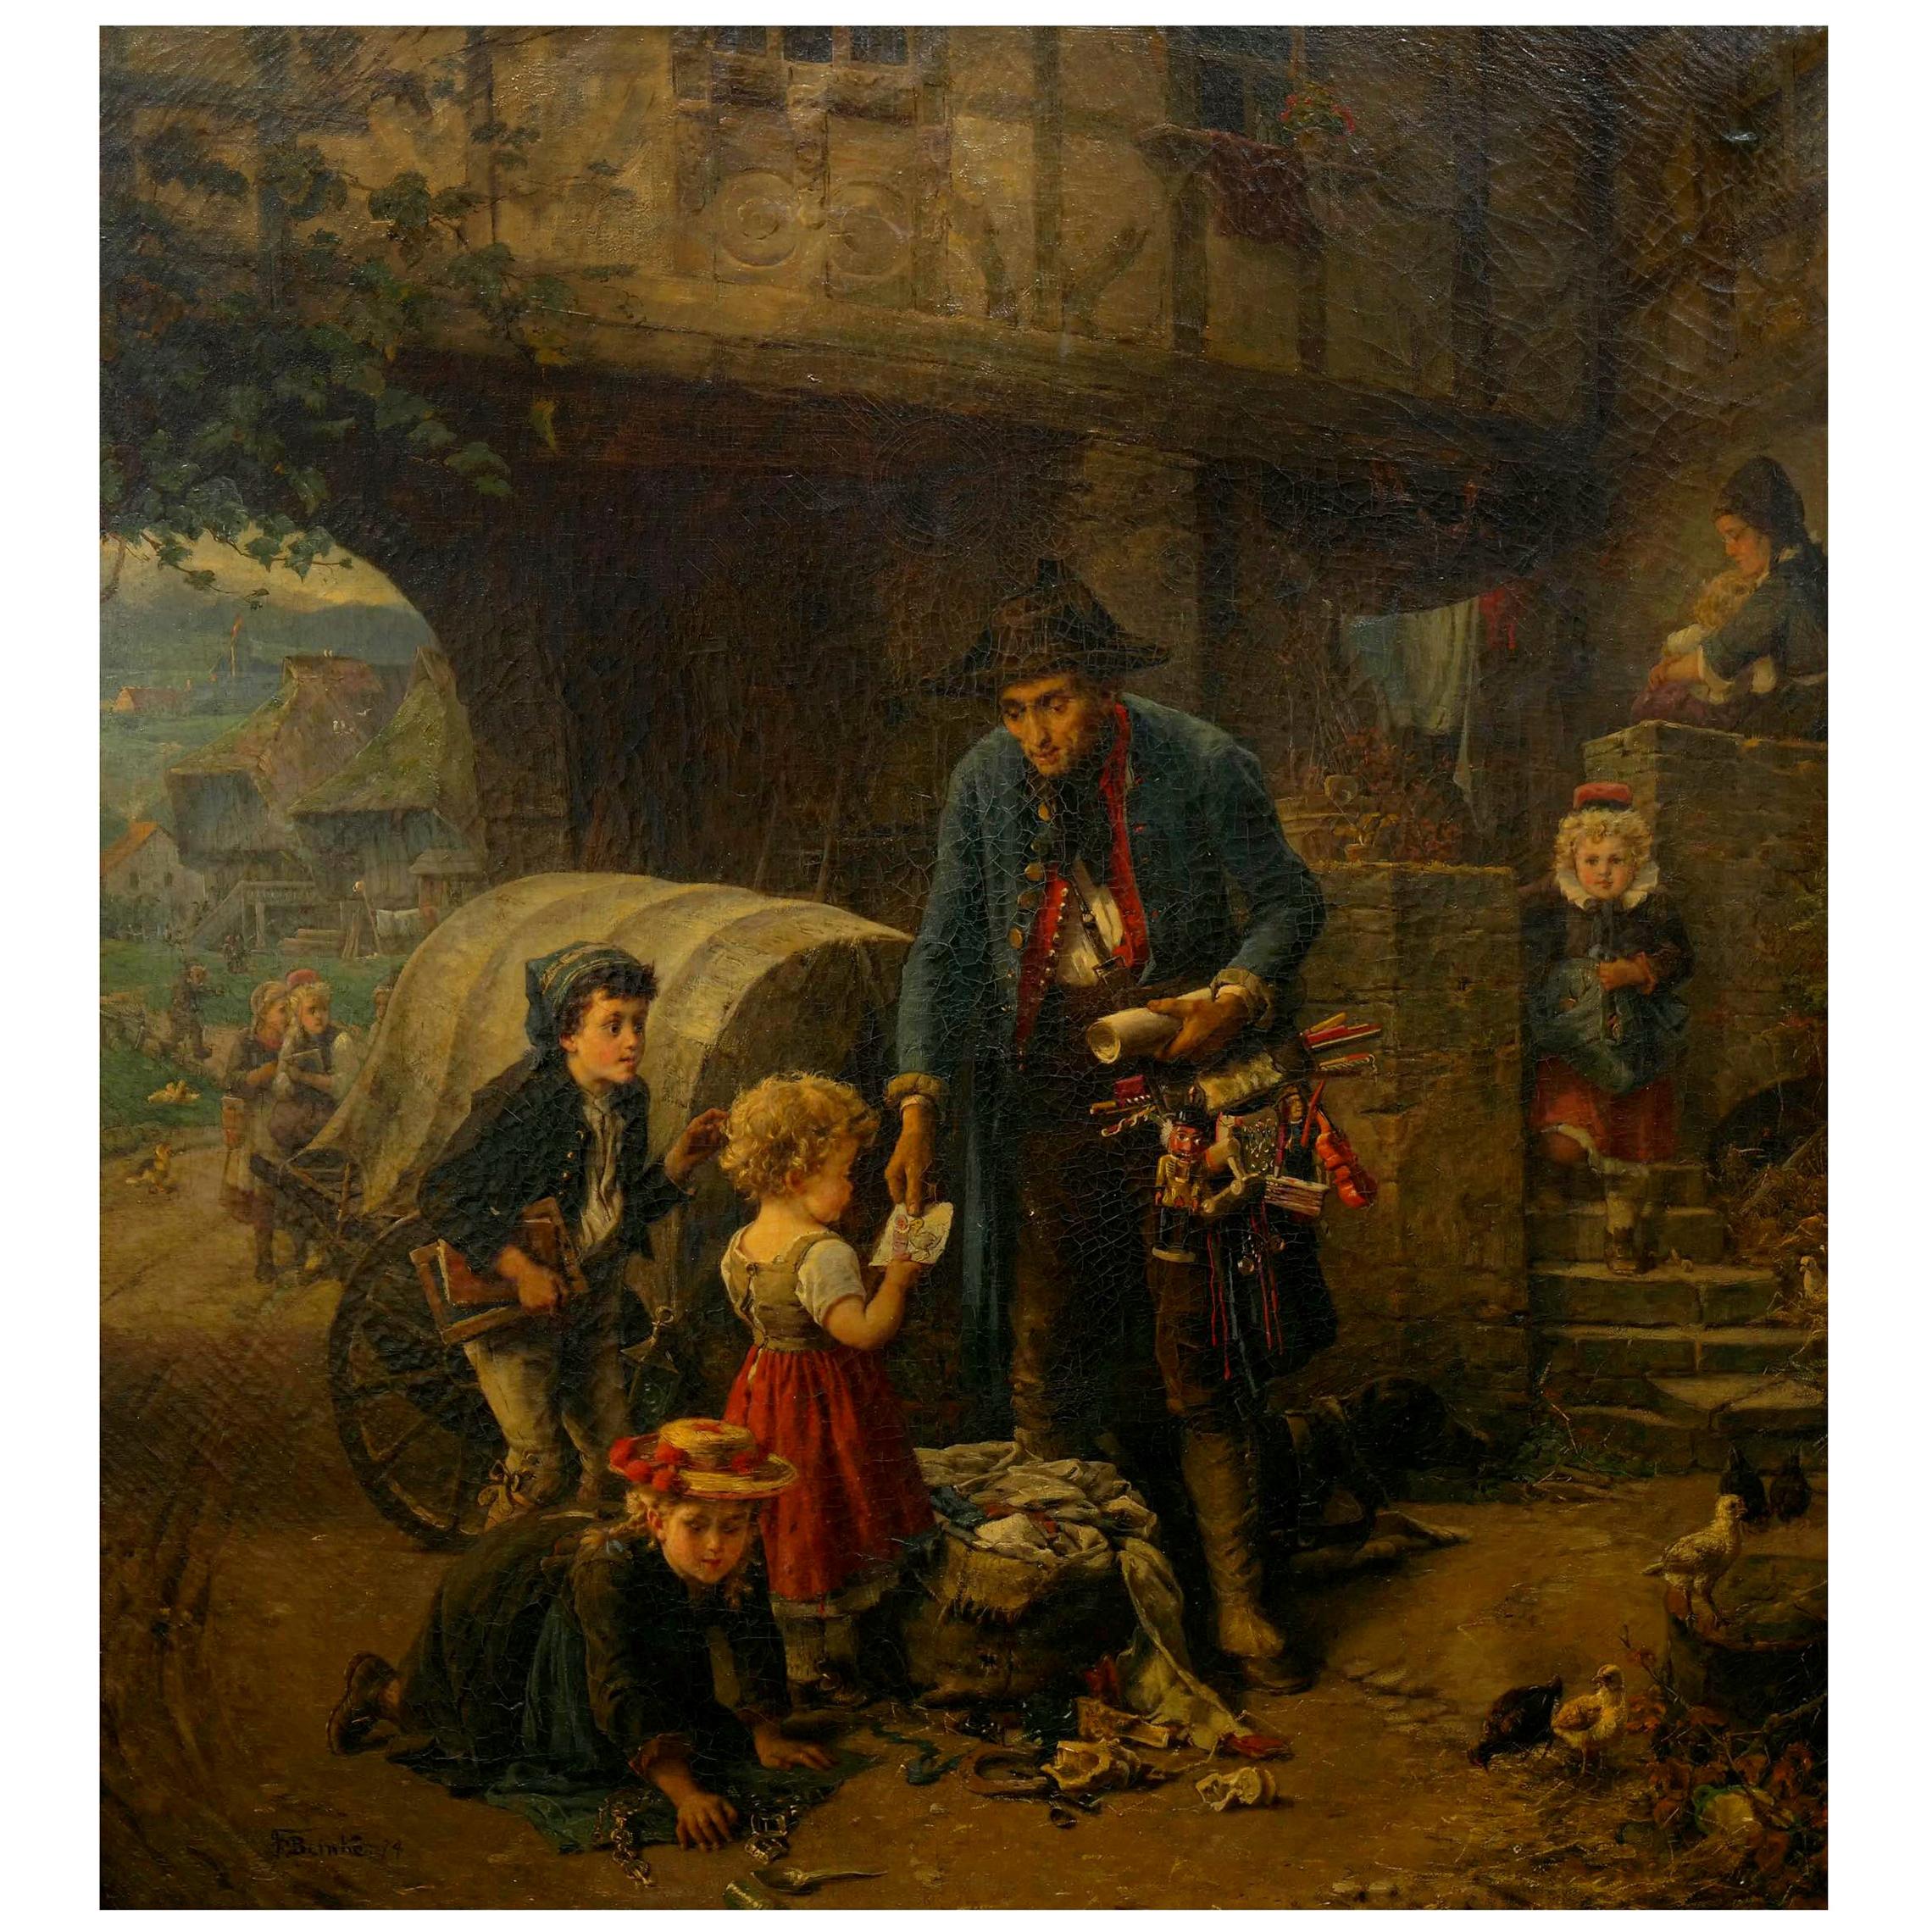 “The Toy Seller” (1874) Antique Oil Painting by Fritz Beinke (German, 1842-1907